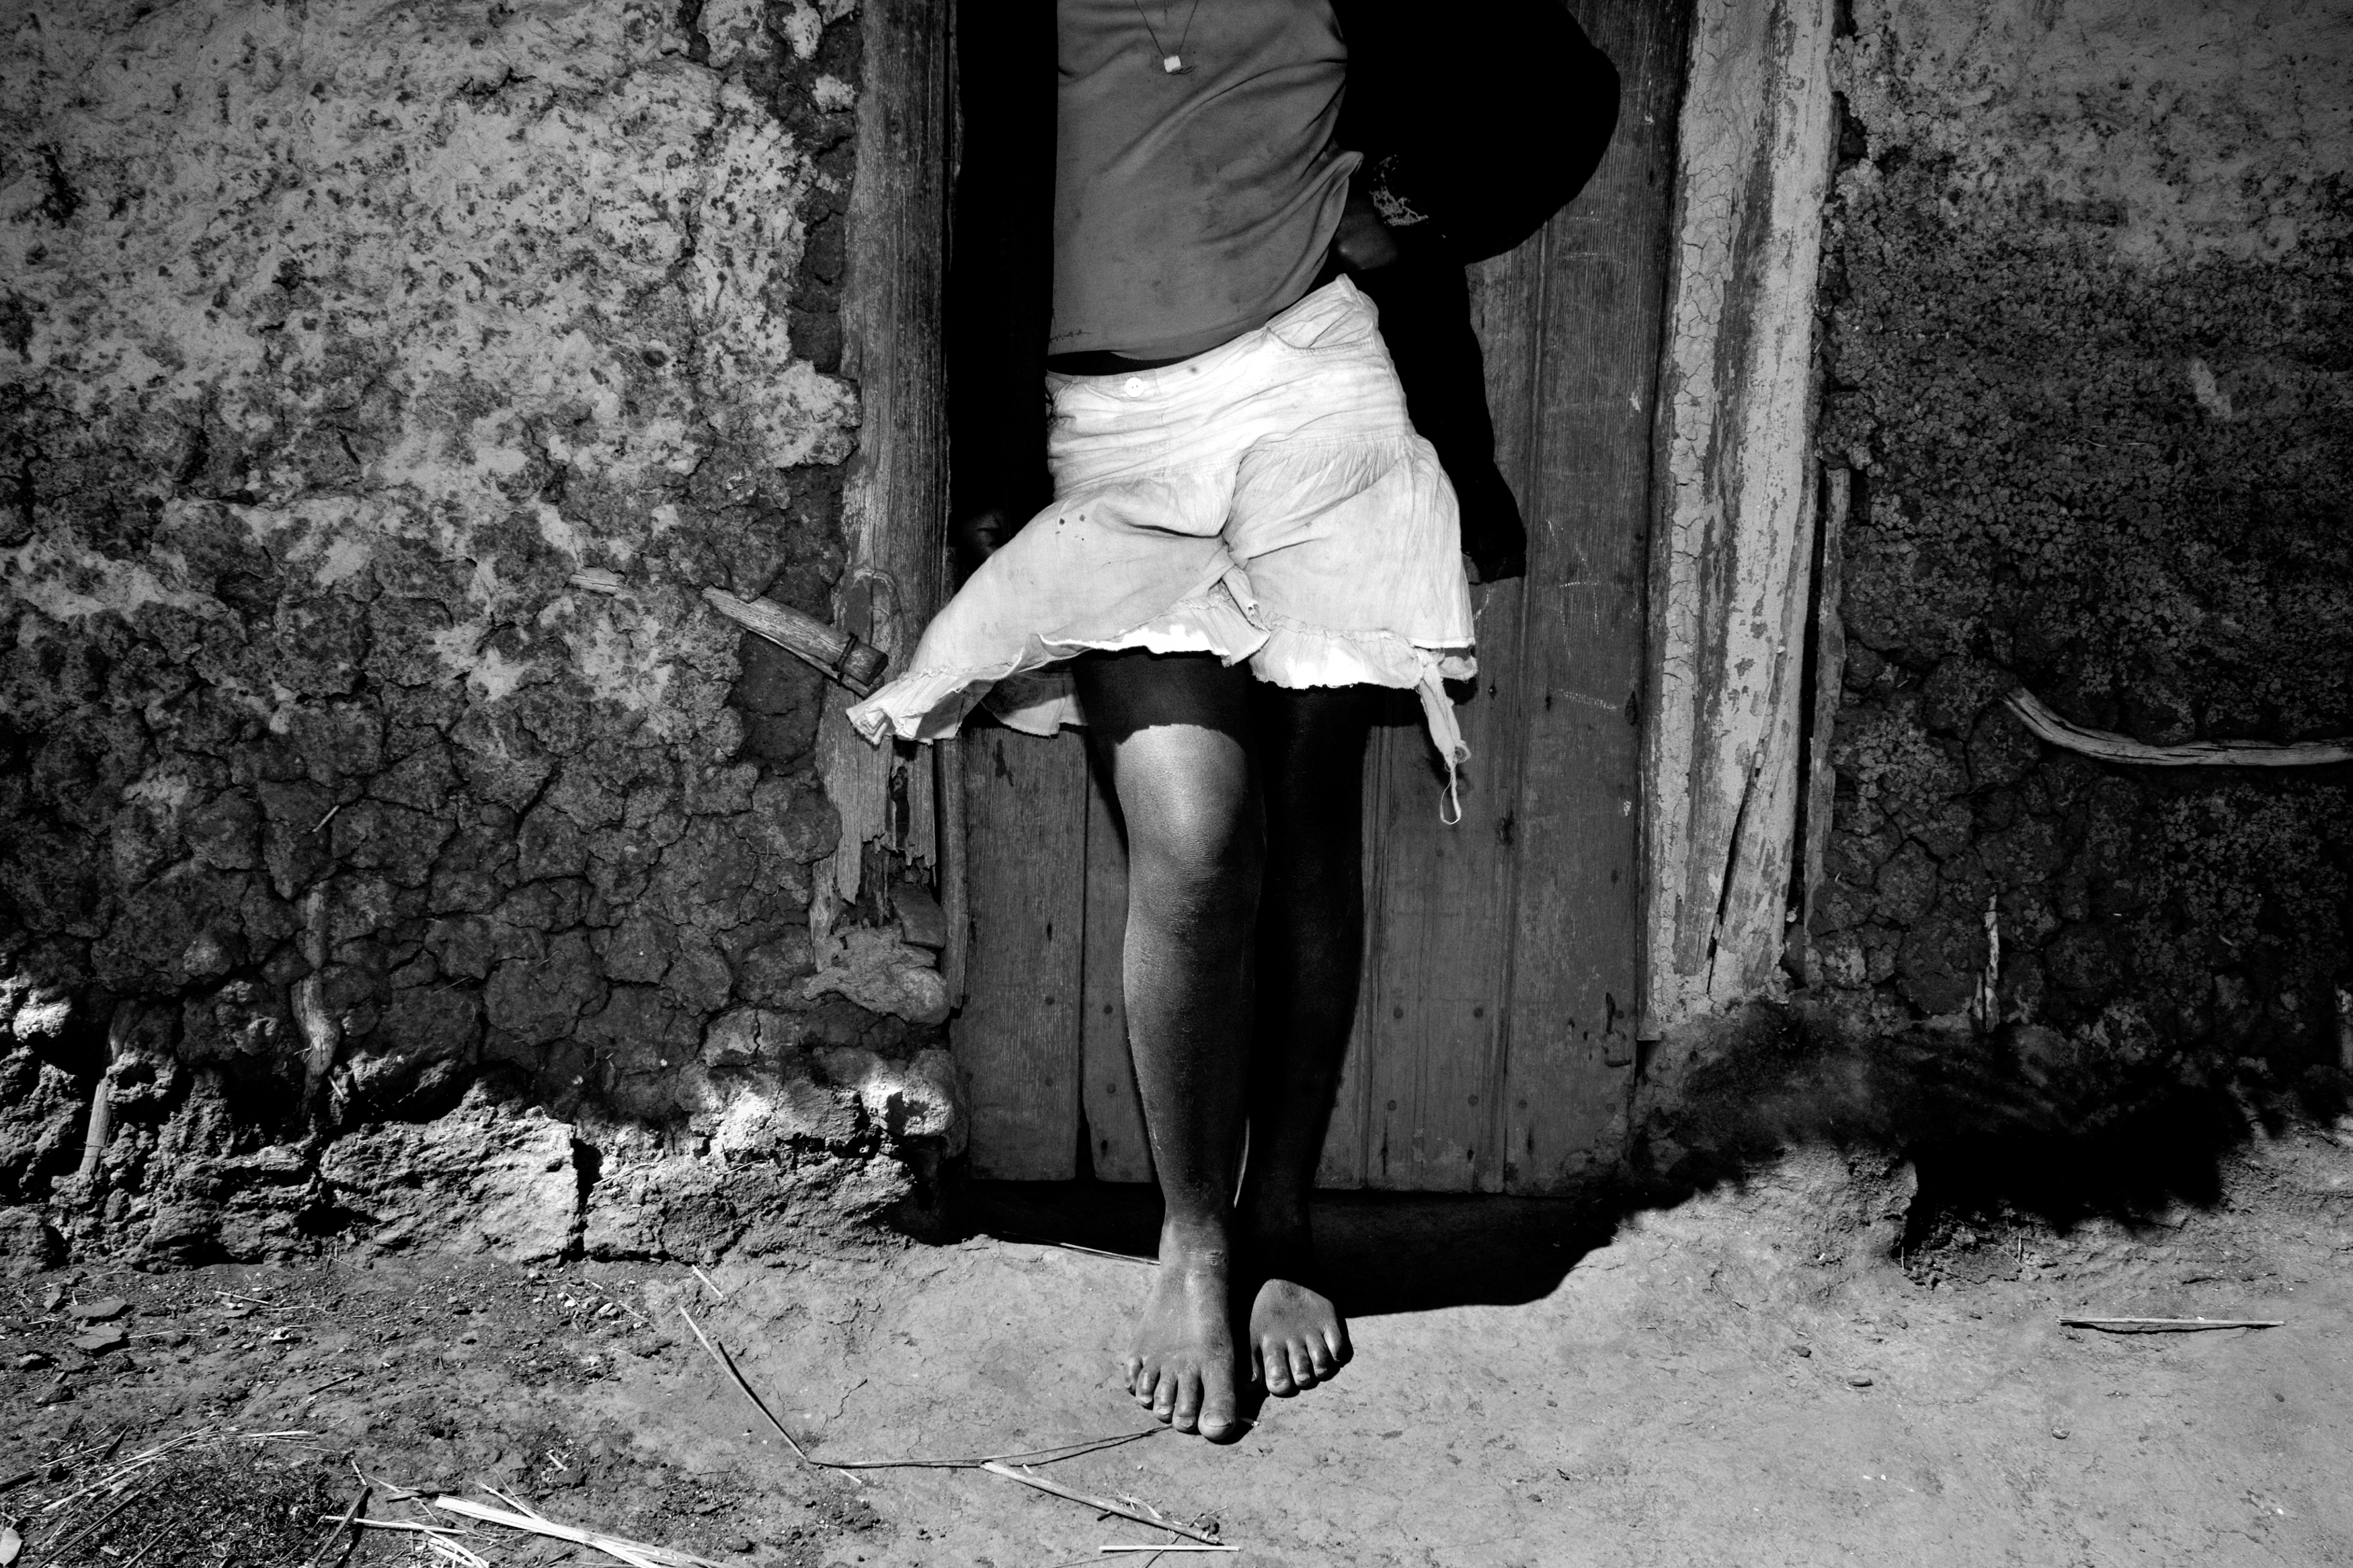 Coming of age for Swazi girls is tough. A tiny African nation of one million people, Swaziland is ruled by one of the world’s last remaining absolute monarchies. Its age-old tradition of polygamy and its relaxed attitude toward sexuality have met in a devastating combination for young girls. Swaziland reports the highest percentage of HIV-positive people in the world, with the hardest hit being young women, aged 15-24. It should come as no surprise that these women rarely live past 31. Their coming of age is complicated by issues like HIV/AIDS, poverty, sexual abuse, and rape. In a period of growth that is meant to be joyous and anxious, the discovery of sexuality is, ironically, the greatest threat to their mortality.

A young girl wears a miniskirt in rural Swaziland. Western dress such as miniskirts have been deemed “unSwazi” and used to justify acts of physical abuse against young girls and women.